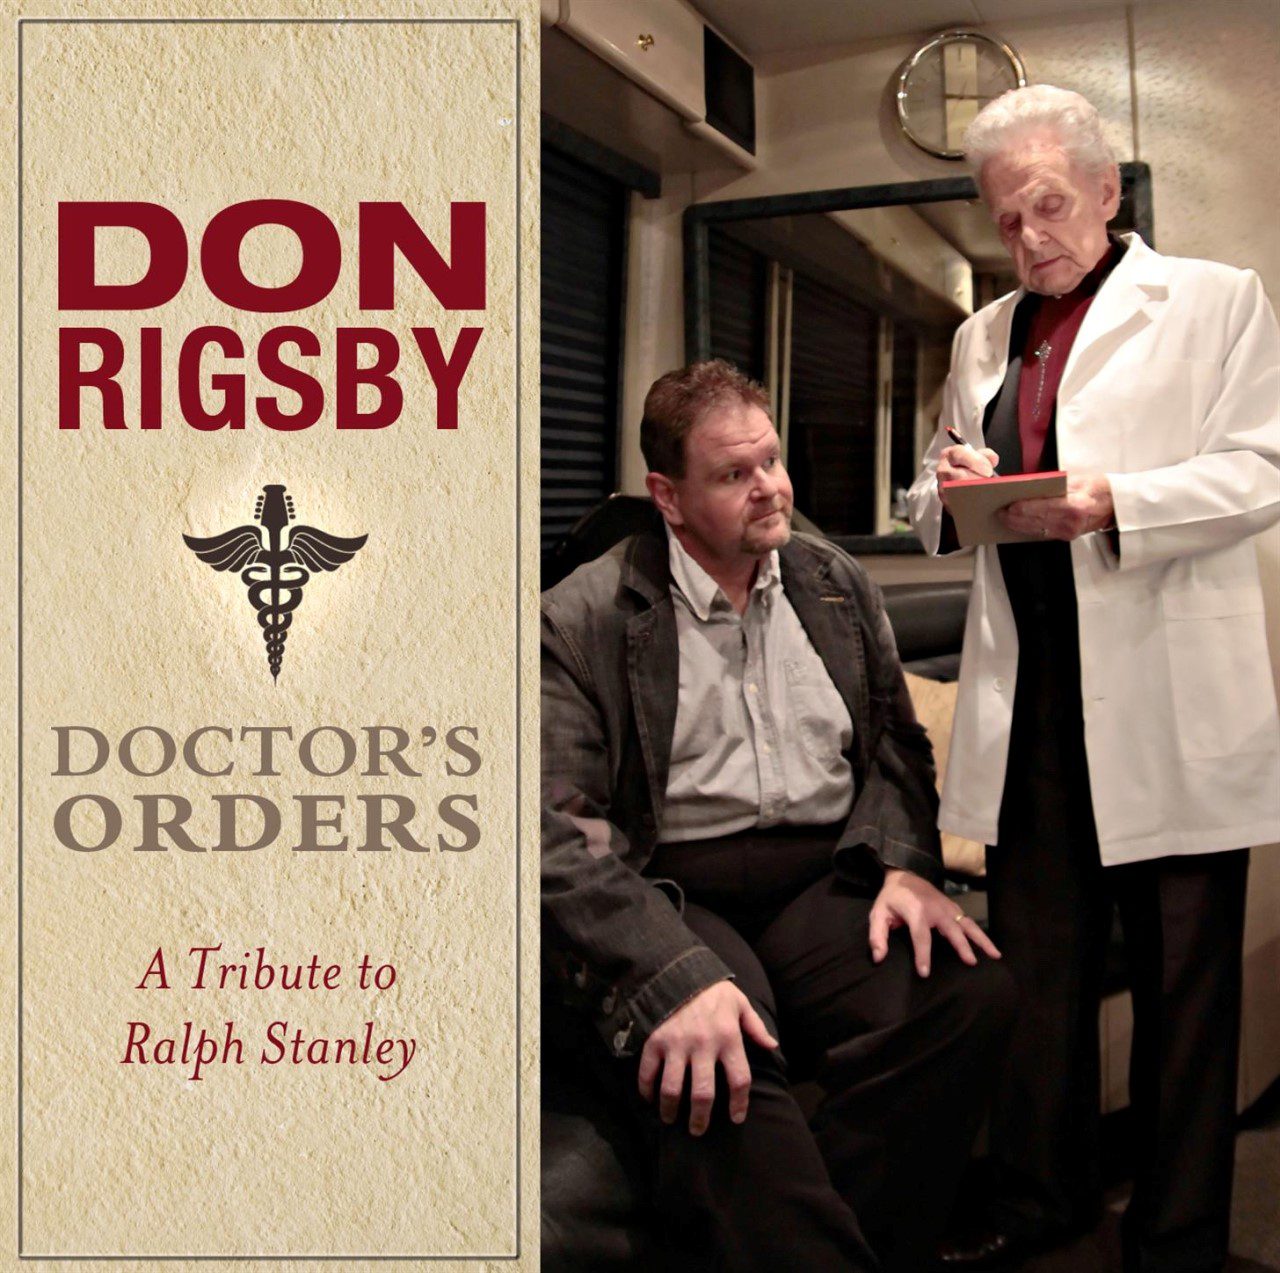 Don Rigsby - Doctor’s Order - A Tribute To Ralph Stanley cover album